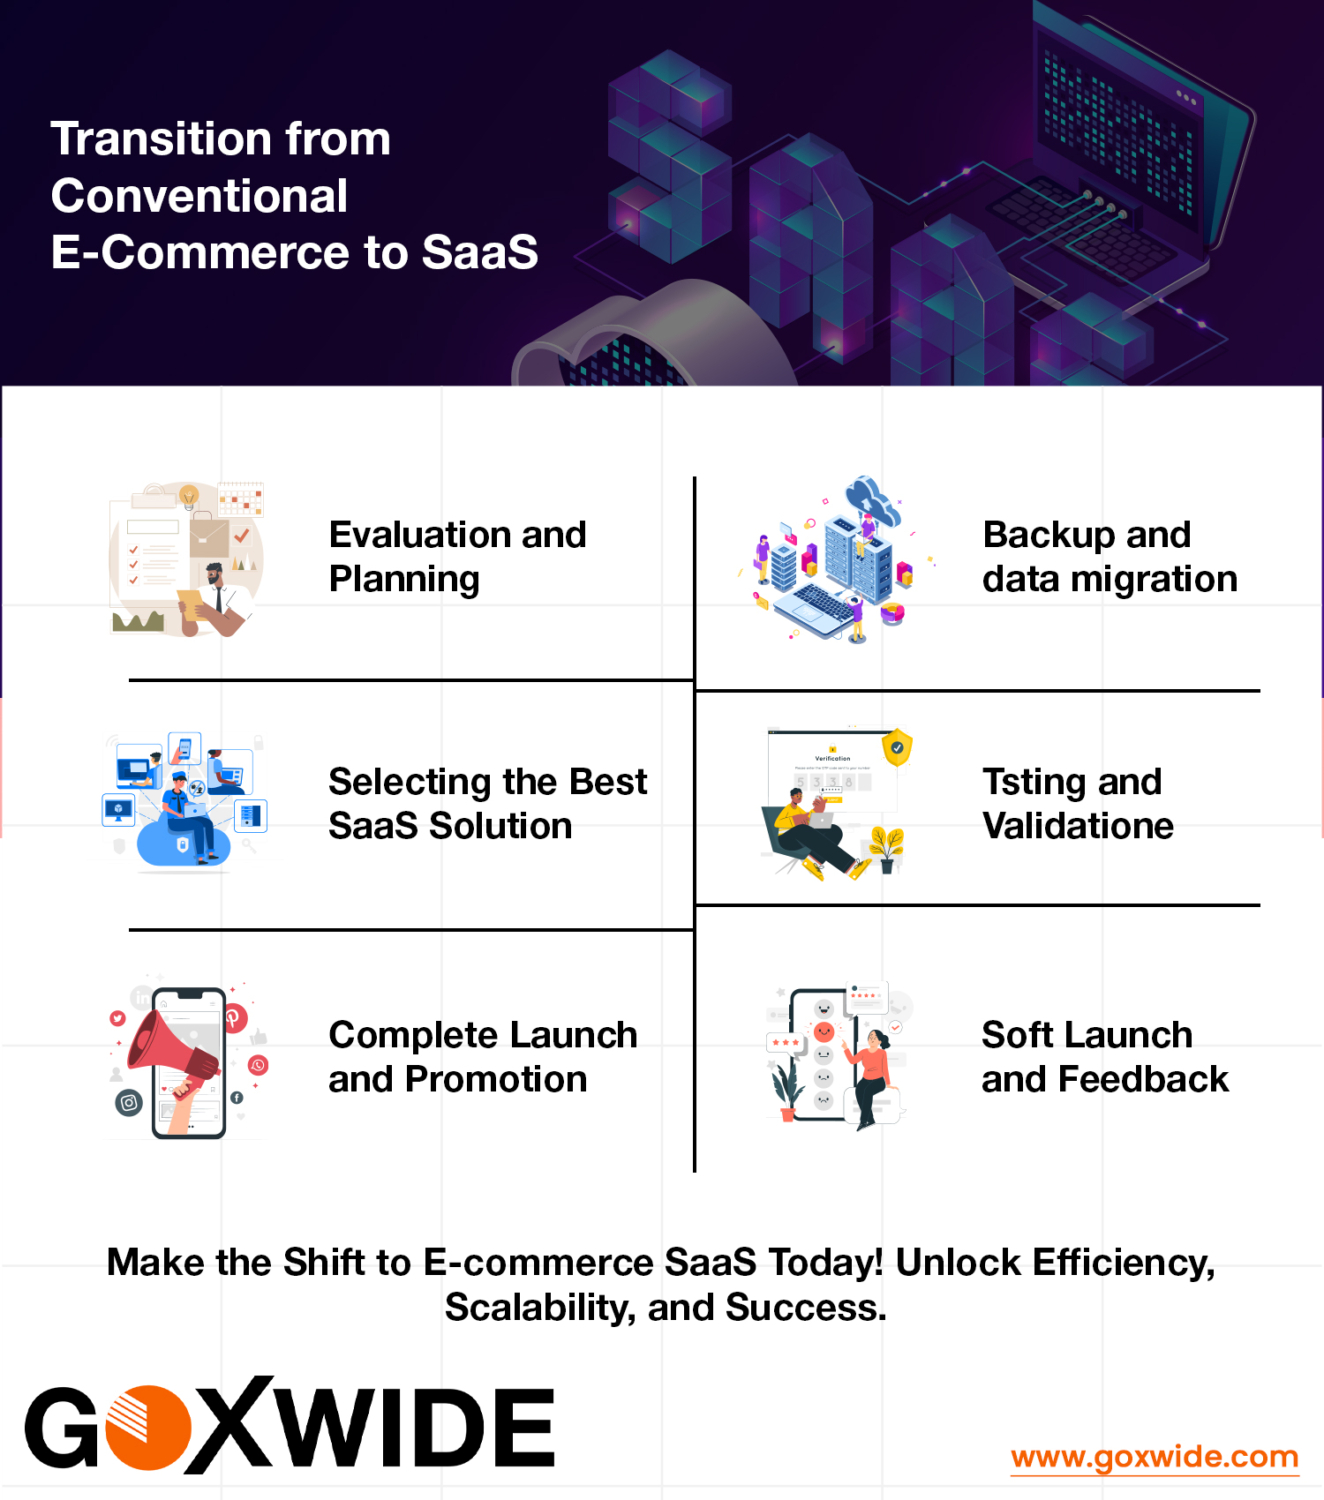 Transitioning to an E-commerce SaaS Model